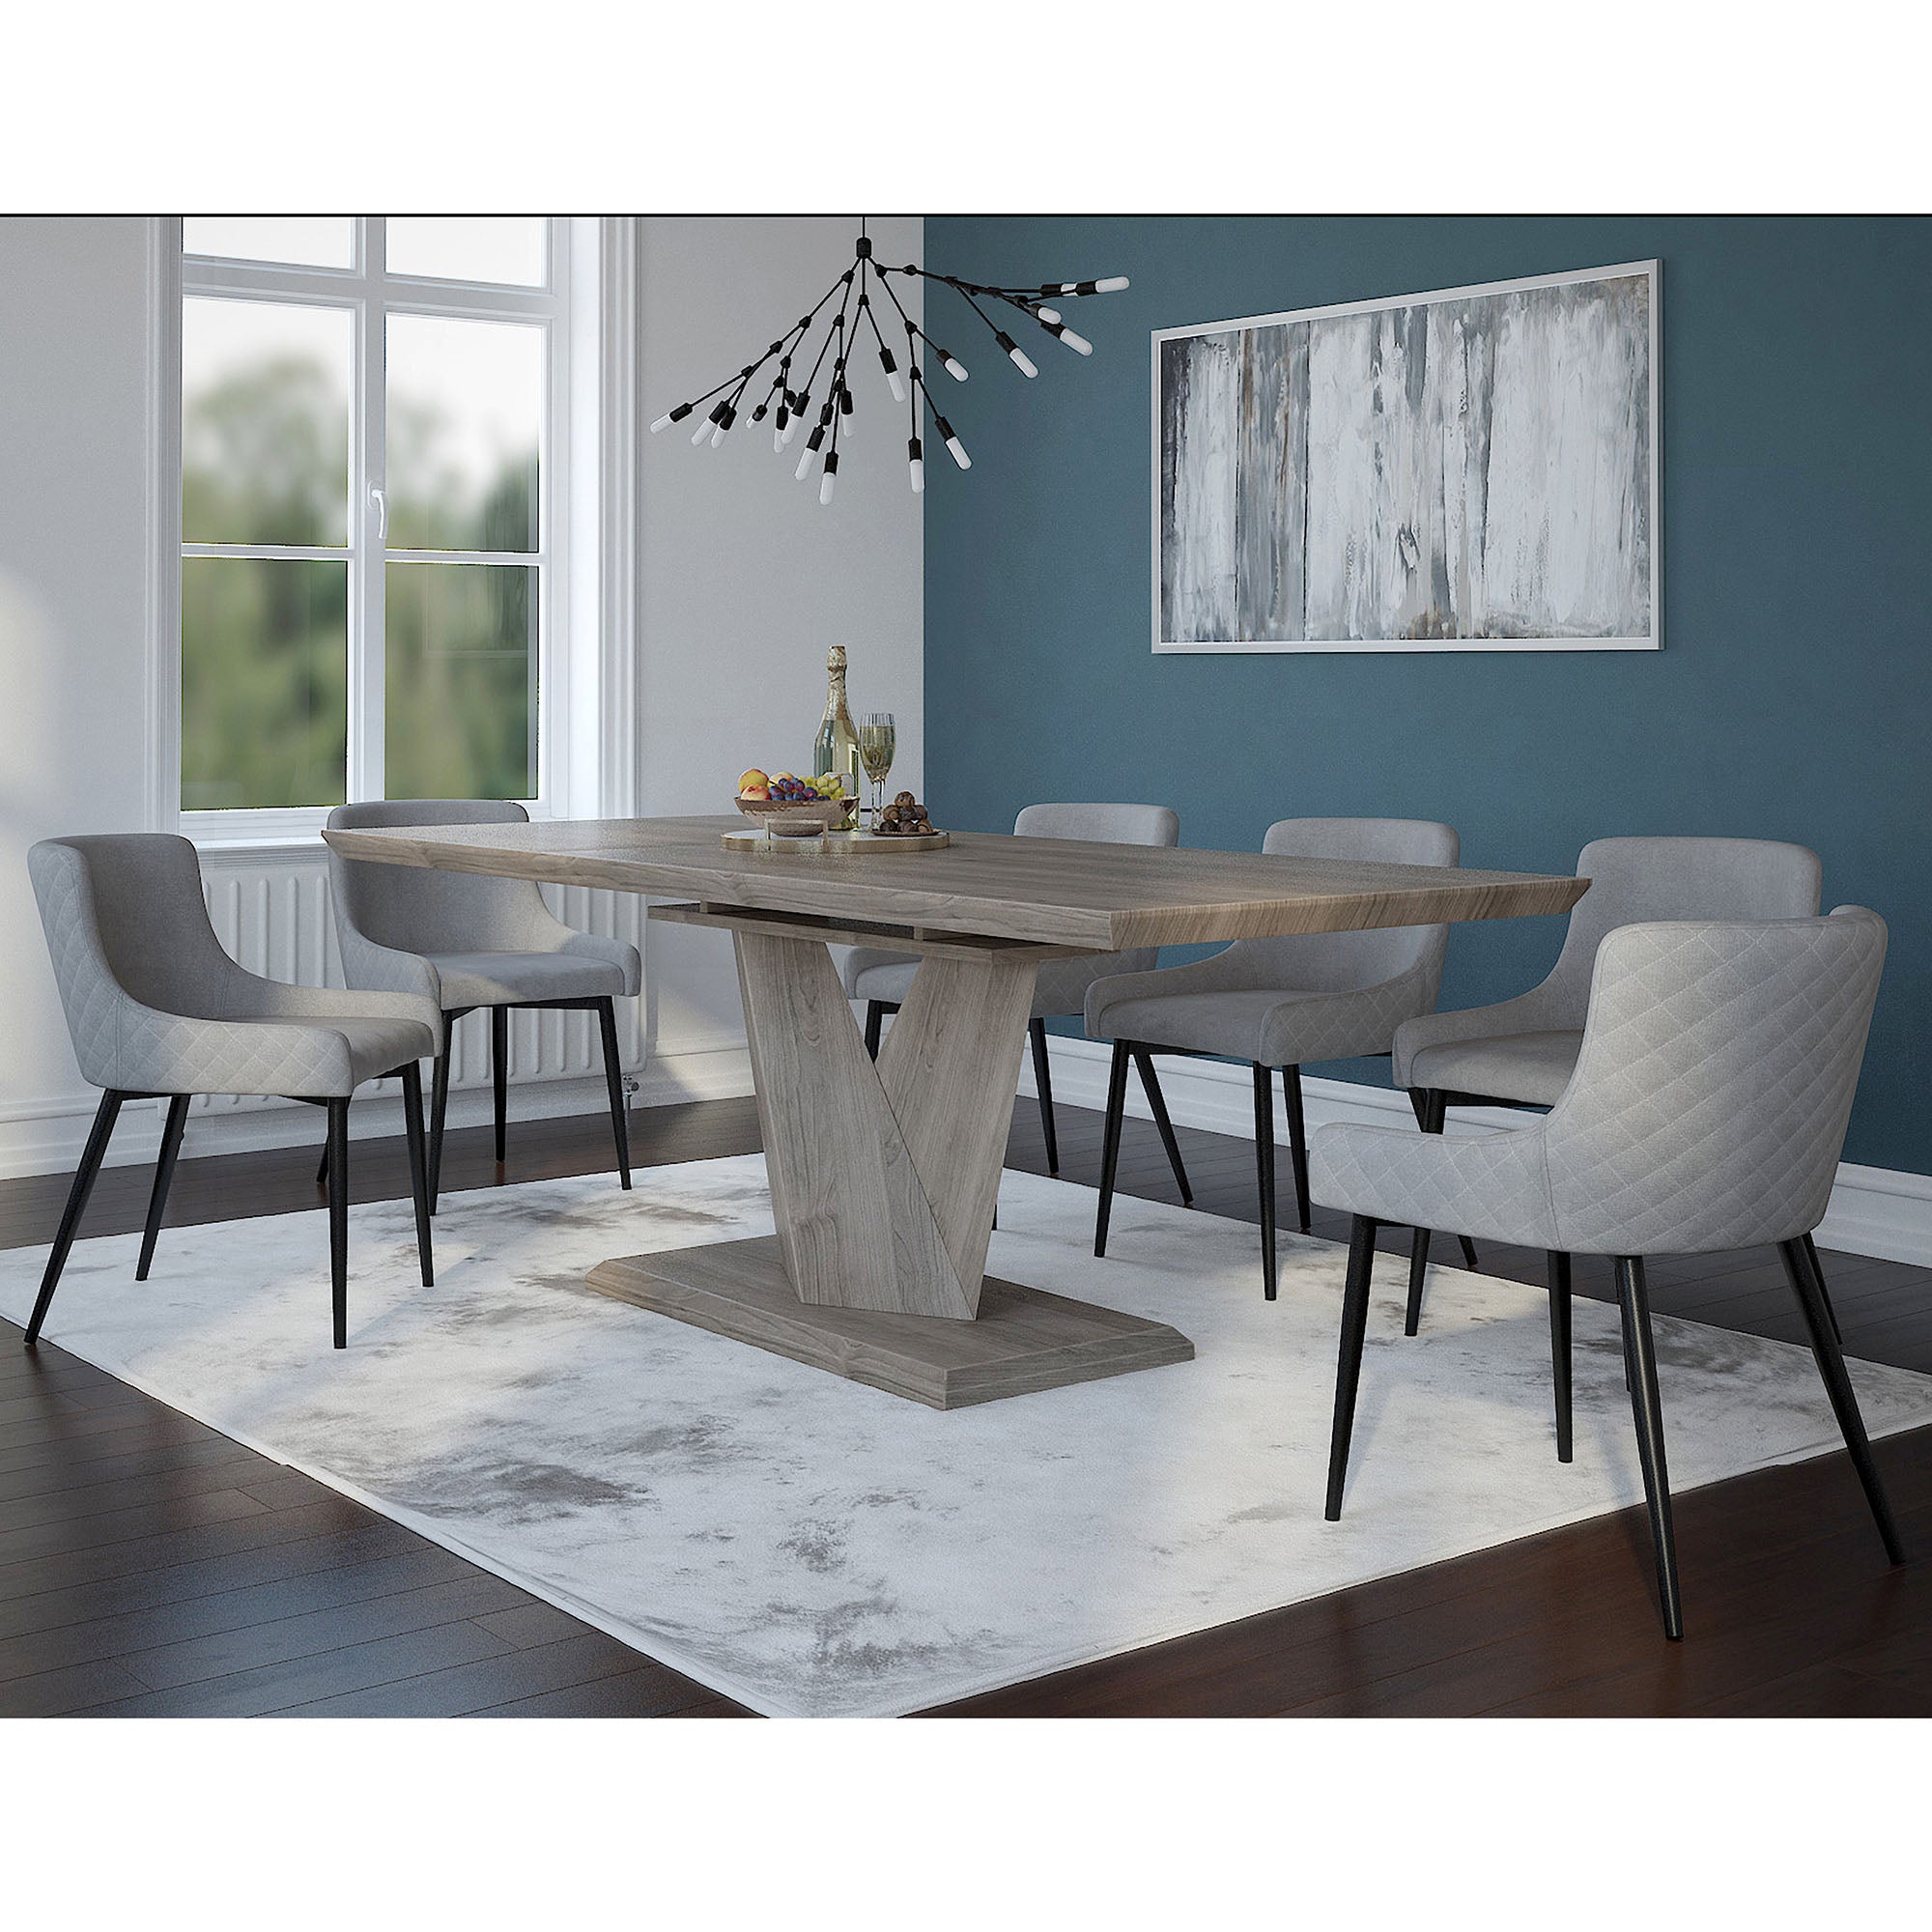 ECLIPSE EXTENSION DINING TABLE OAK / BIANCA GREY CHAIRS -7PC DINING SET